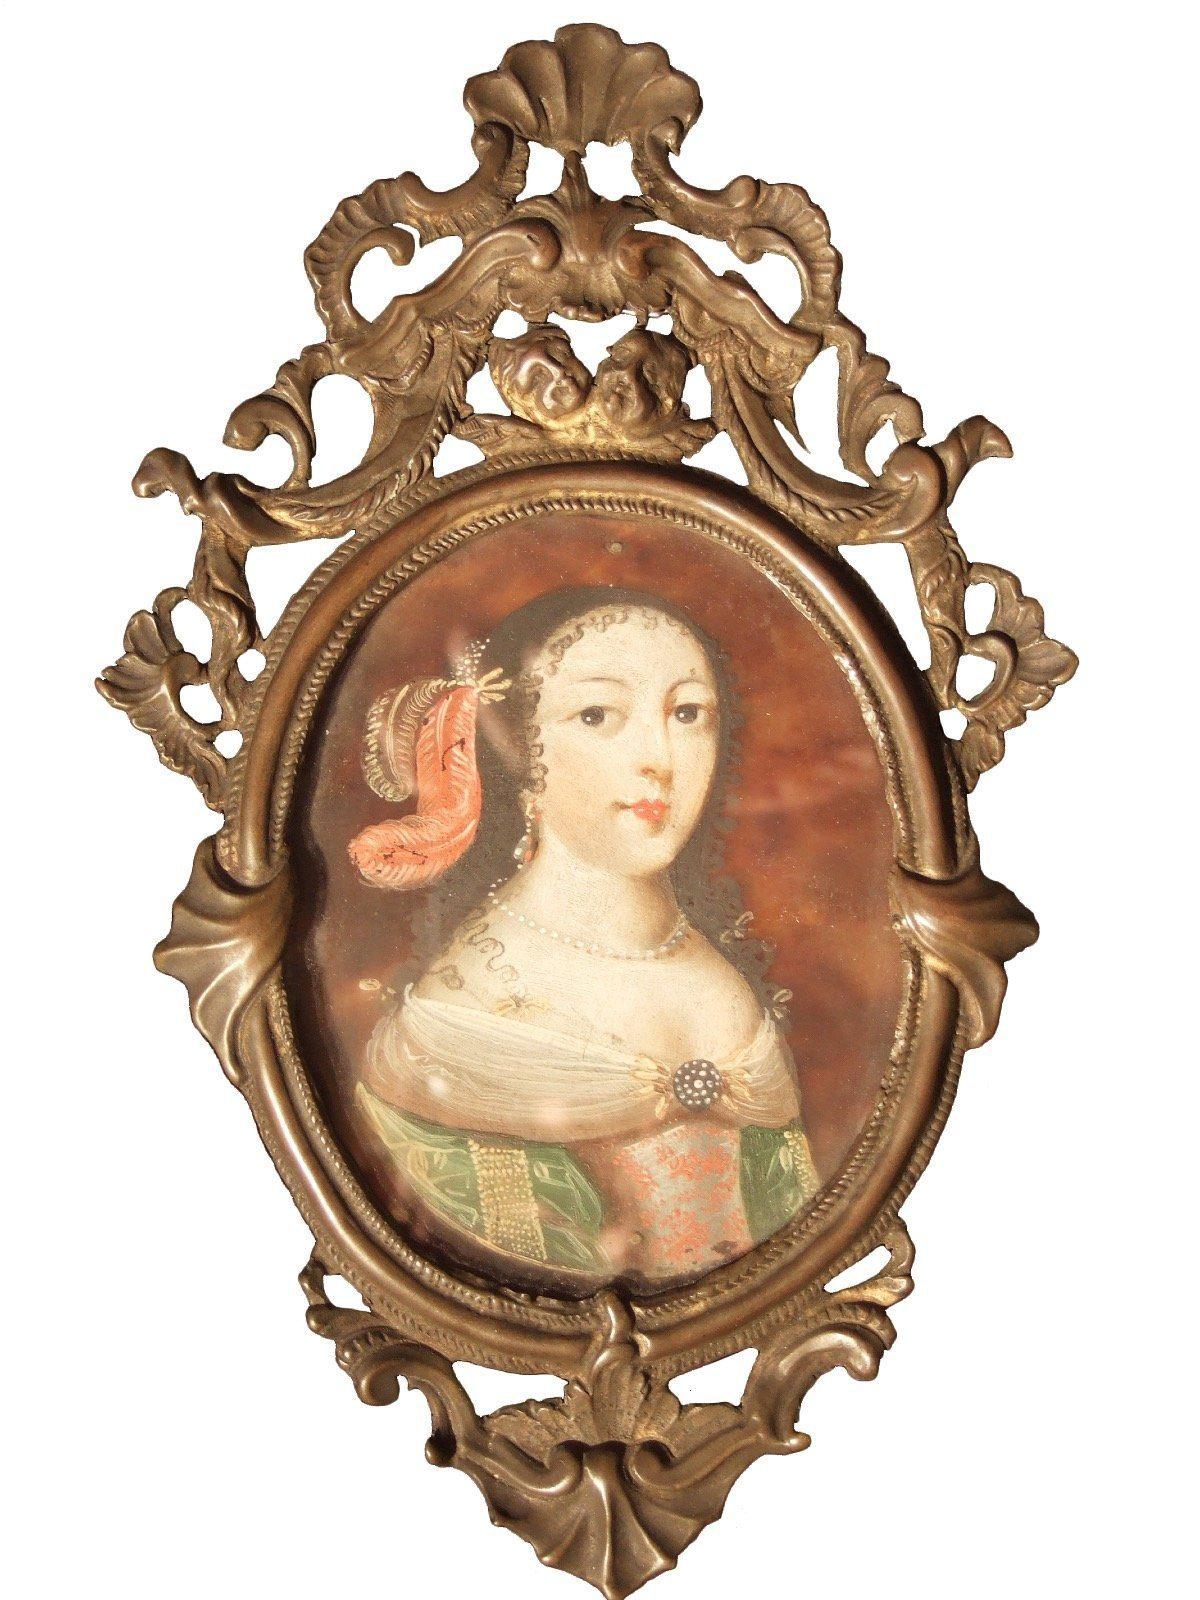 Oval portrait Miniature on tortoiseshell of a noblewoman, probably Spanish, 17th-early 18th century. In original beautiful bronze molded frame. Image size: 3 3/4